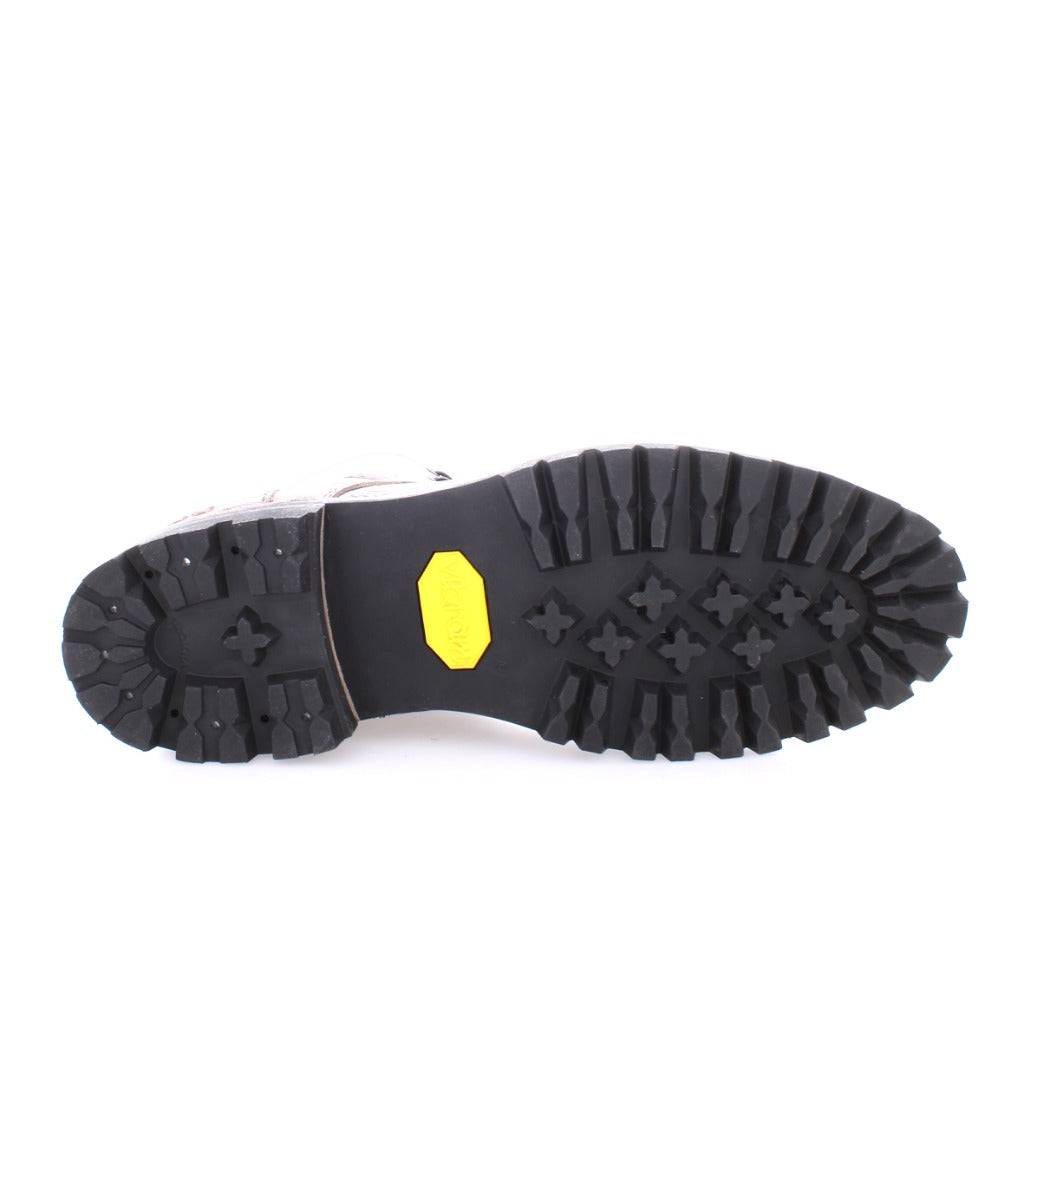 Sole of a Bed Stu Protege Trek hiking boot showing deep tread and a yellow logo detail.